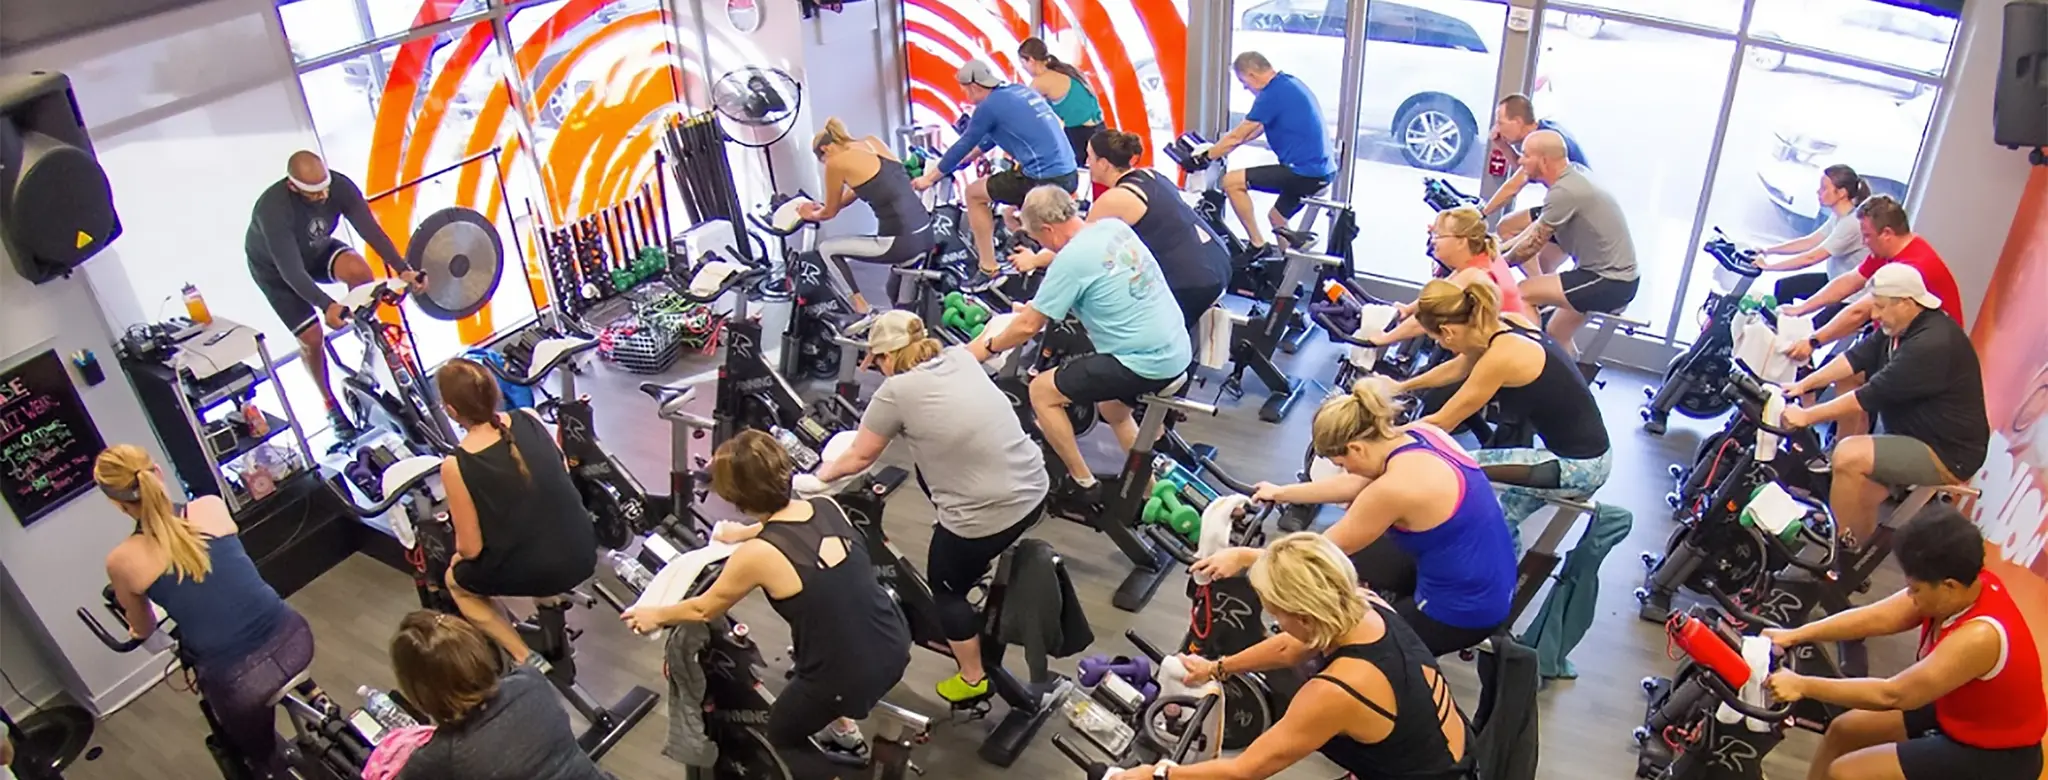 A cycling class at InCycle in Indianapolis, Indiana